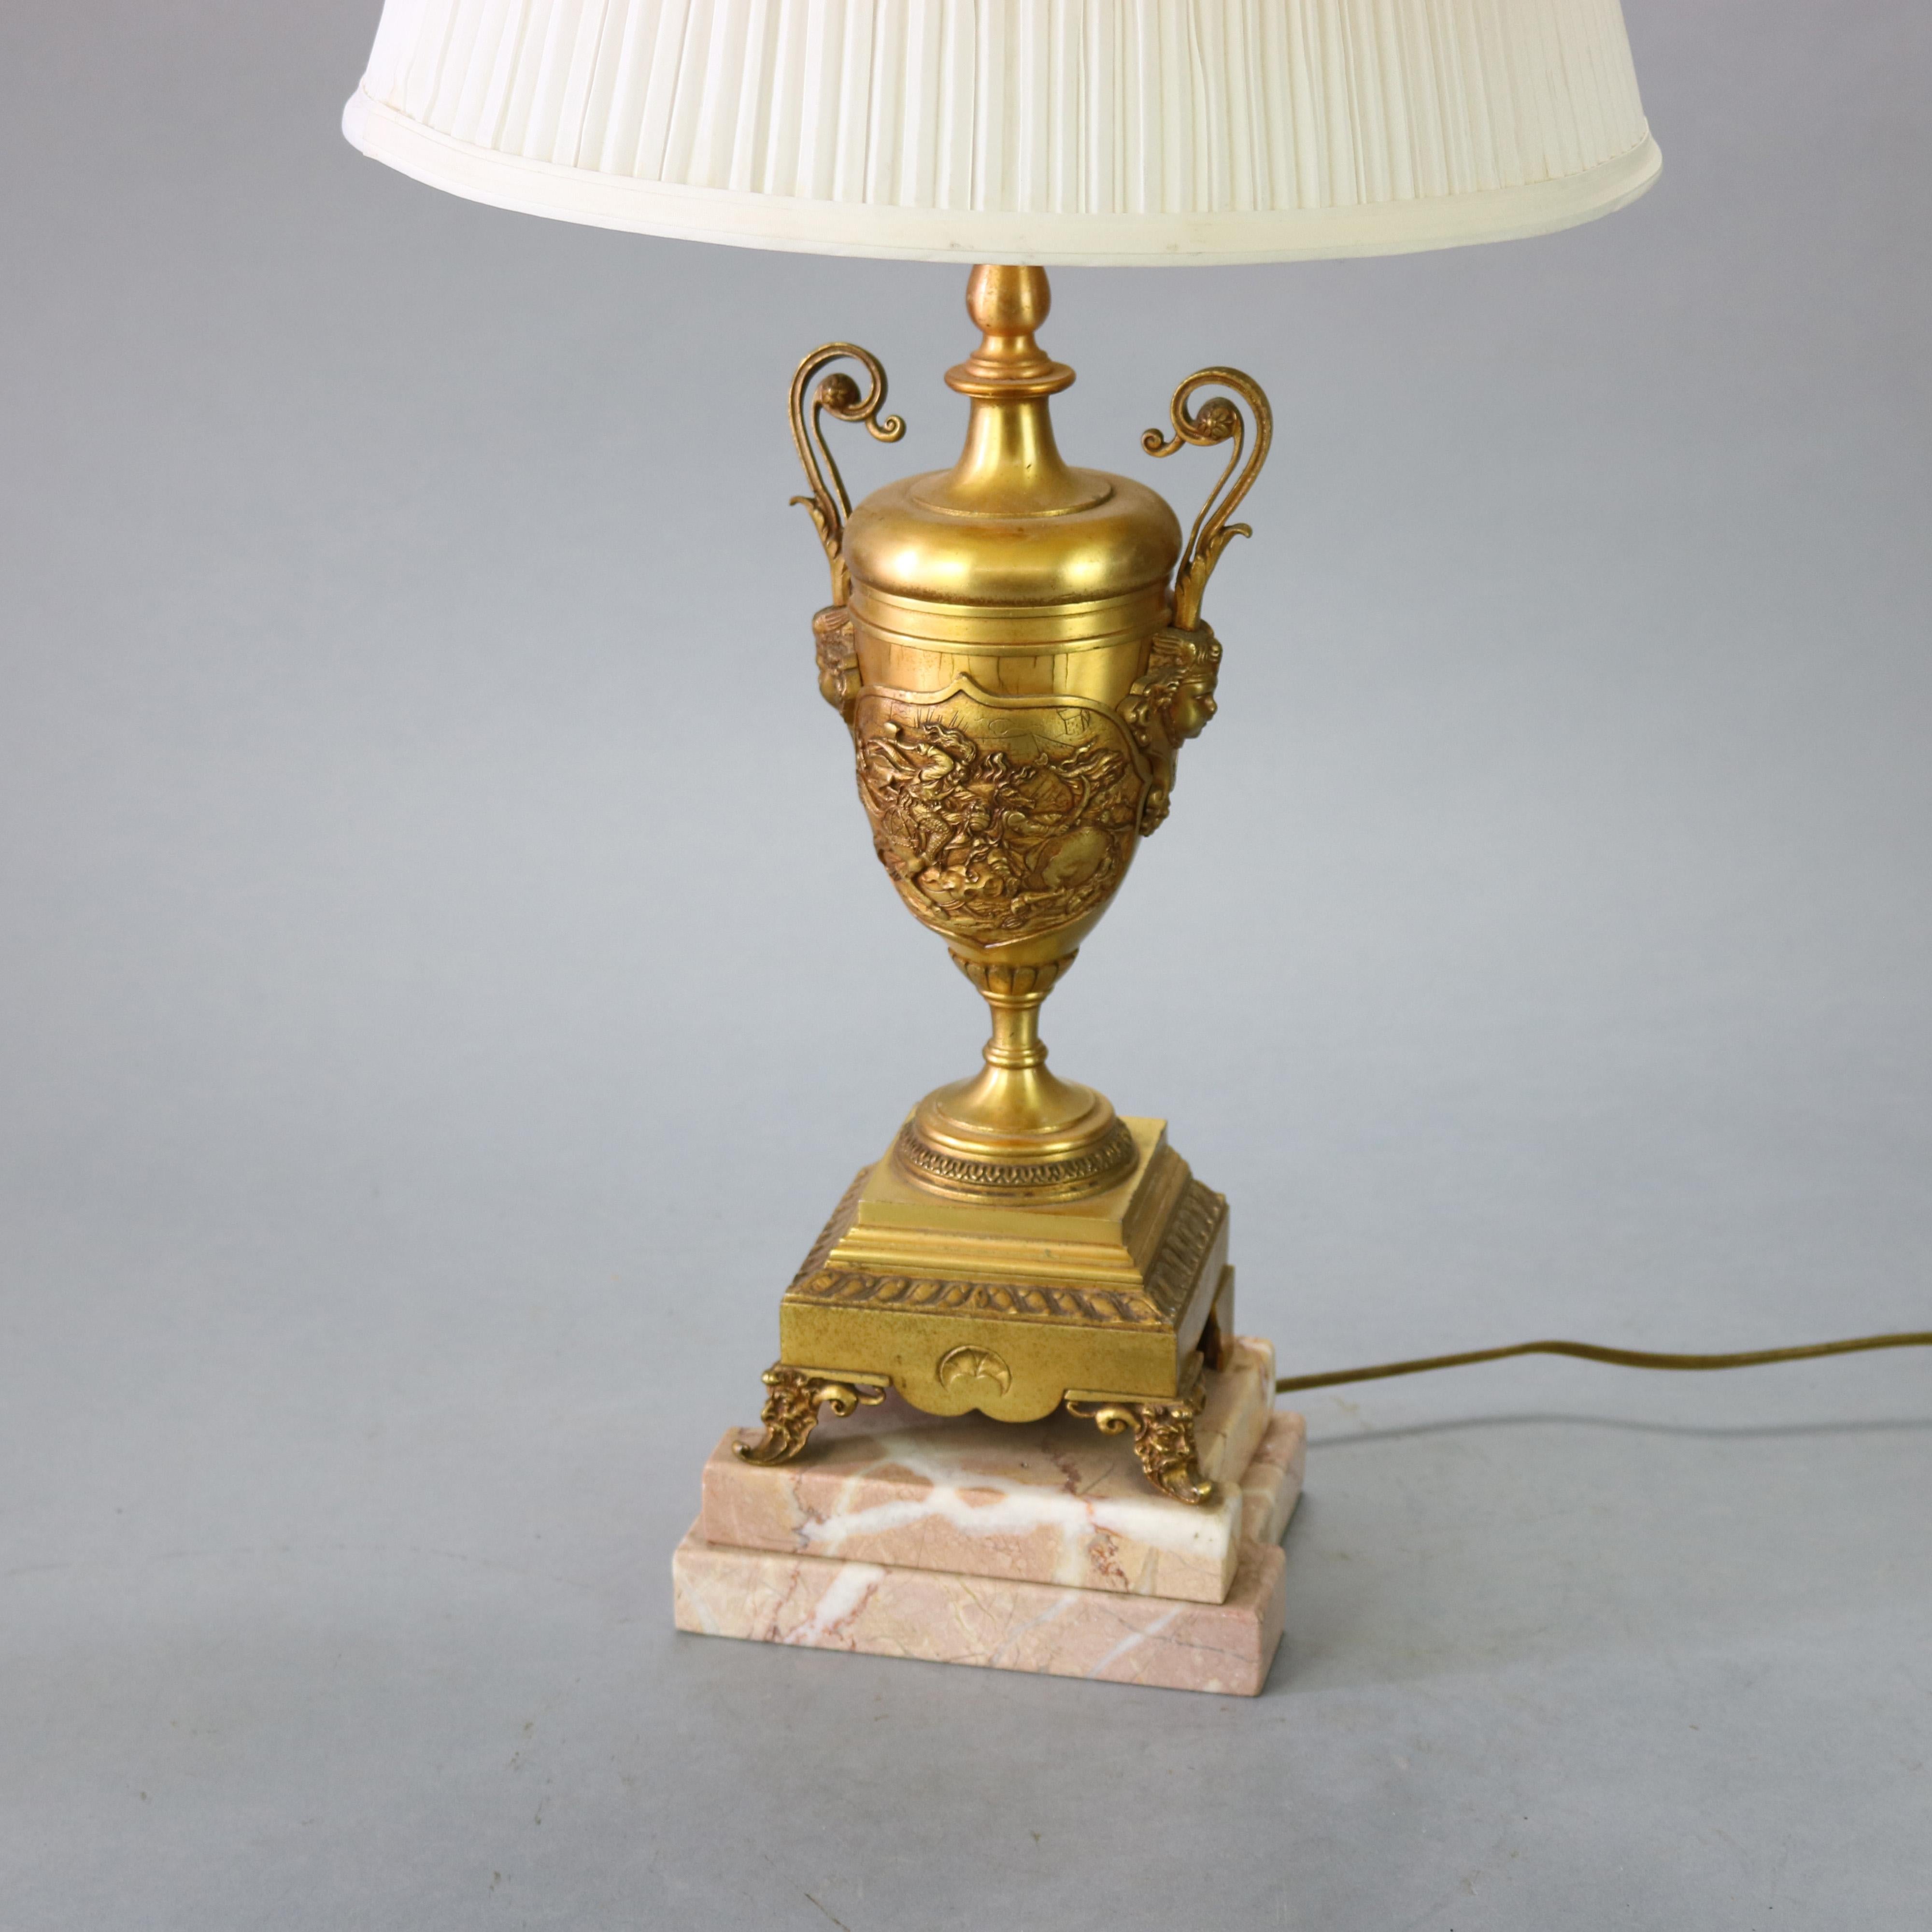 Antique Asian Figural Gilt Bronze Urn Form Table Lamp, Battle Scene, c1890 In Fair Condition For Sale In Big Flats, NY